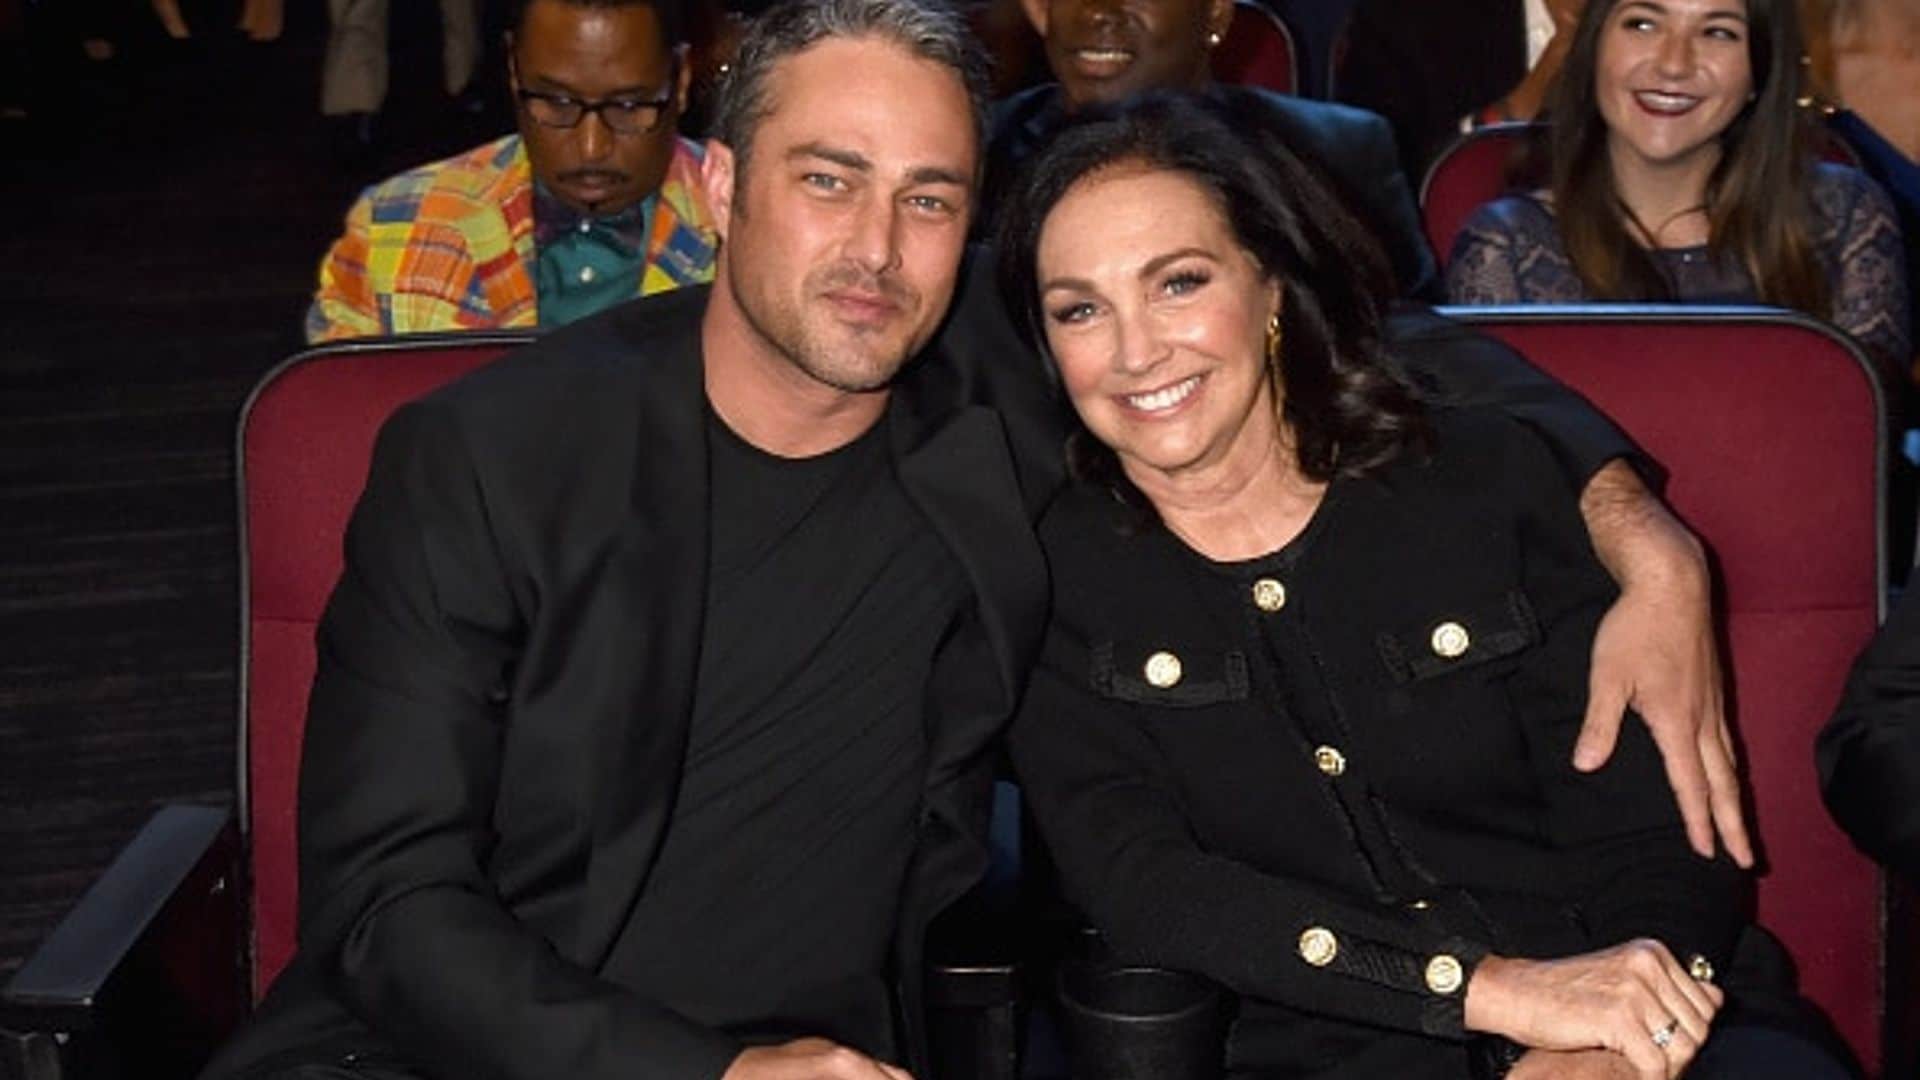 Taylor Kinney's mother recalls meeting Lady Gaga: 'I loved her from the moment I met her'